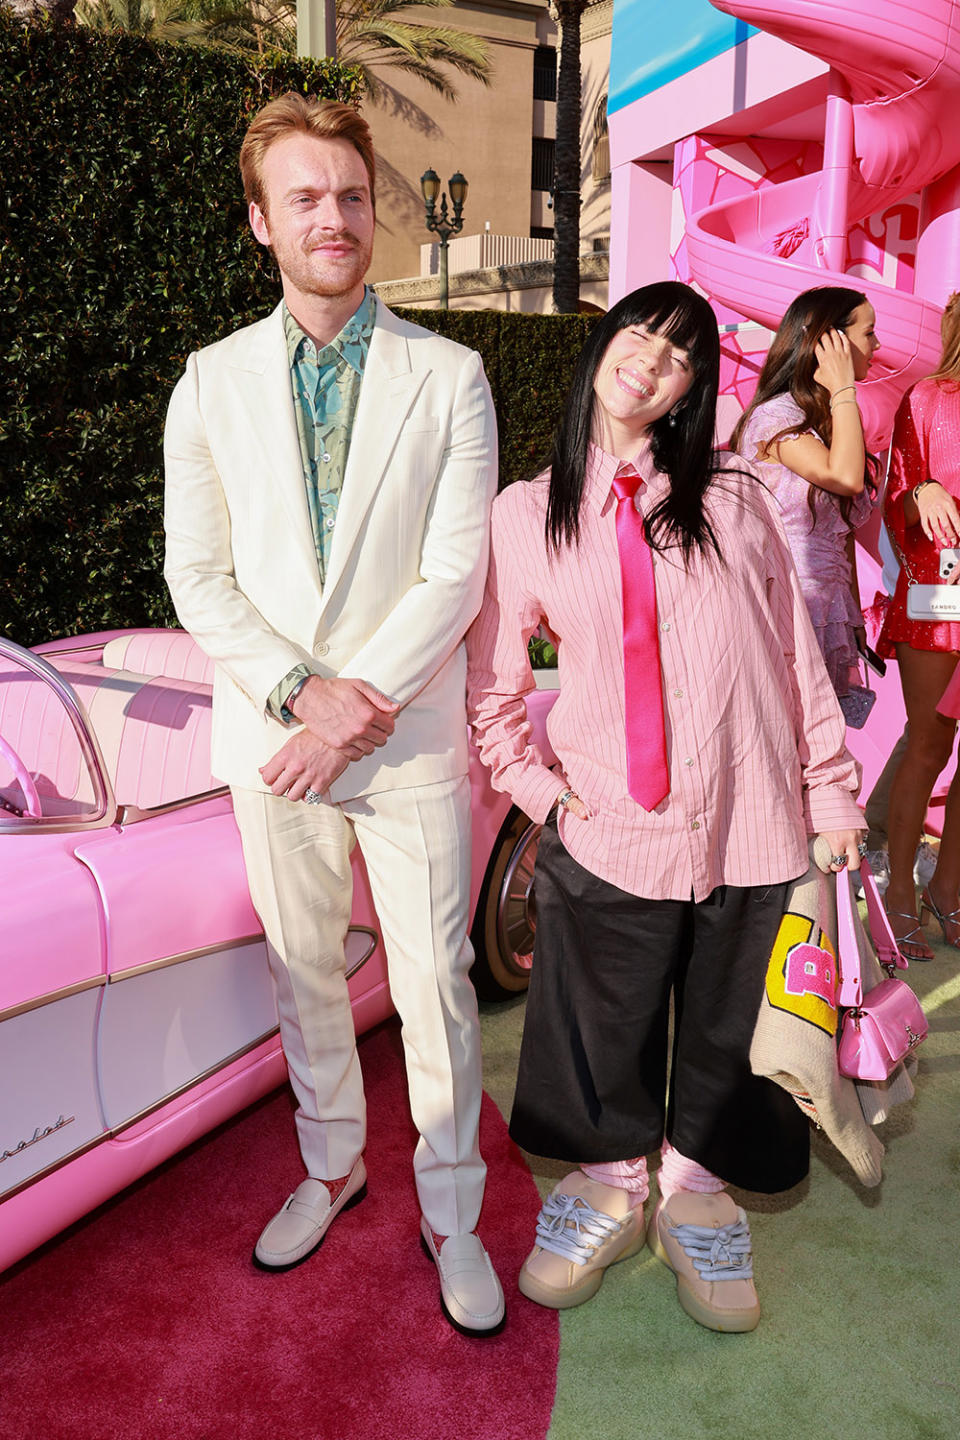 (L-R) FINNEAS and Billie Eilish attend the world premiere of "Barbie" at Shrine Auditorium and Expo Hall on July 09, 2023 in Los Angeles, California.